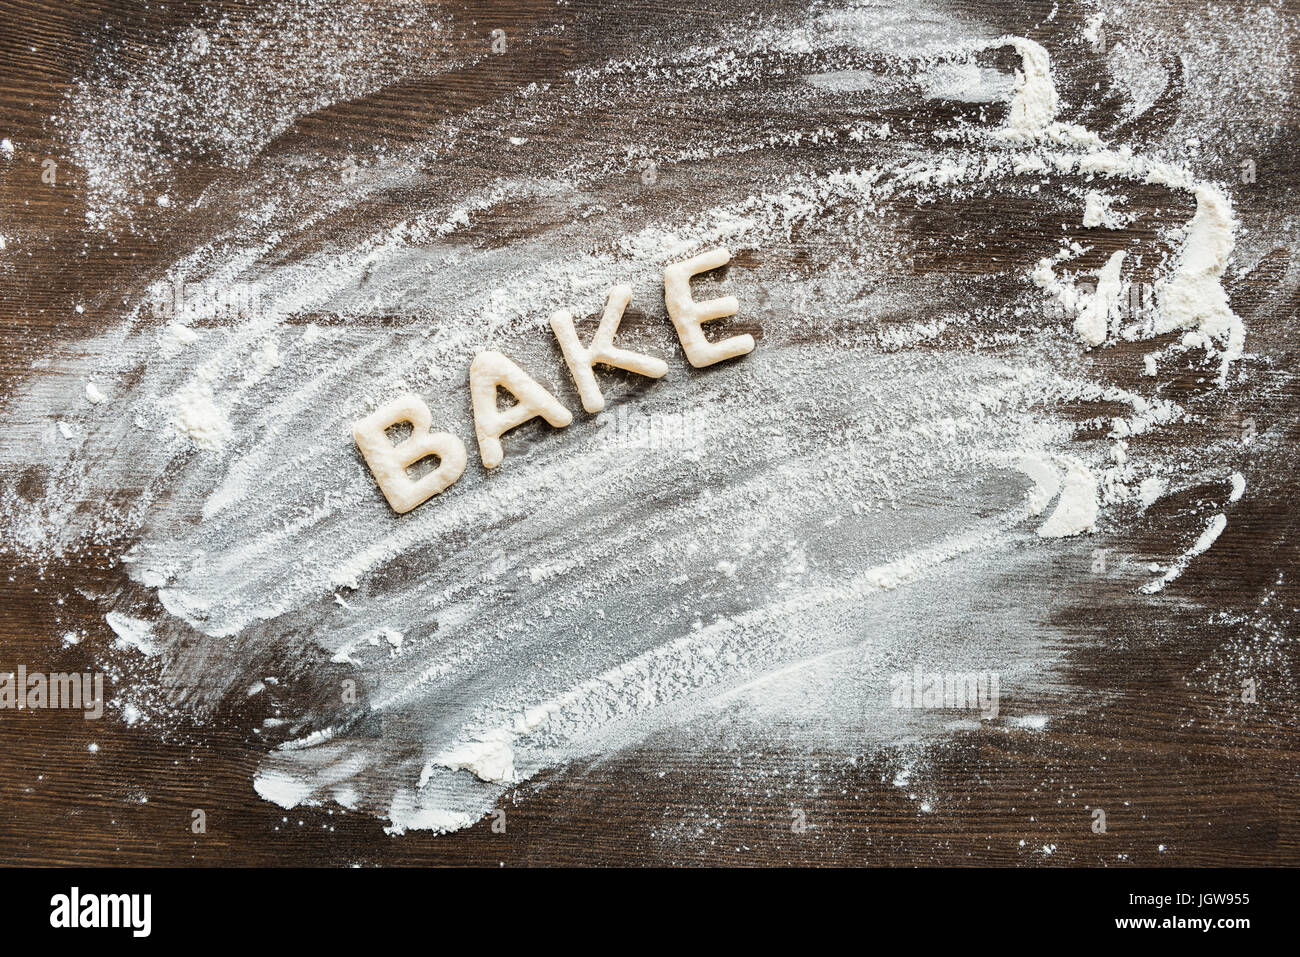 Top view of edible word bake made from sweet crunchy cookies, baking cookies concept Stock Photo